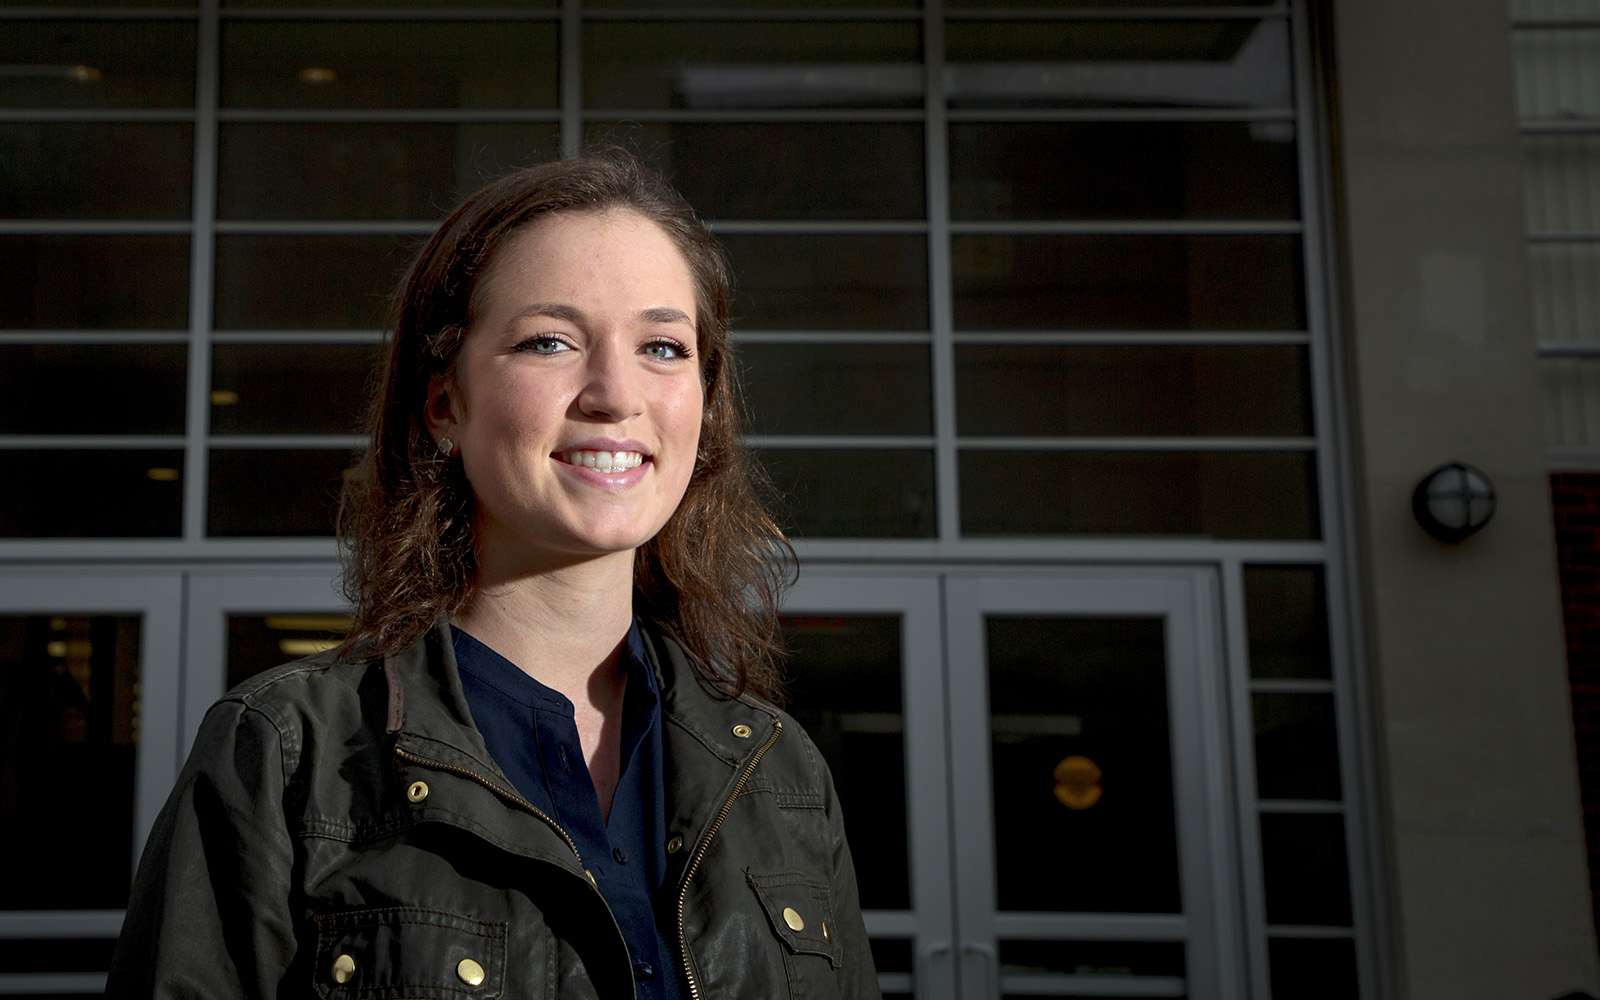 Lindsey Gilson, a senior studying Management and Engineering for Manufacturing, was awarded Intern of the Year by the American Society of Engineering Education. Gilson, a native of Trumbull, Conn., interned with Unilever in Minneapolis last year. Gilson will graduate this May. (UConn Foundation)